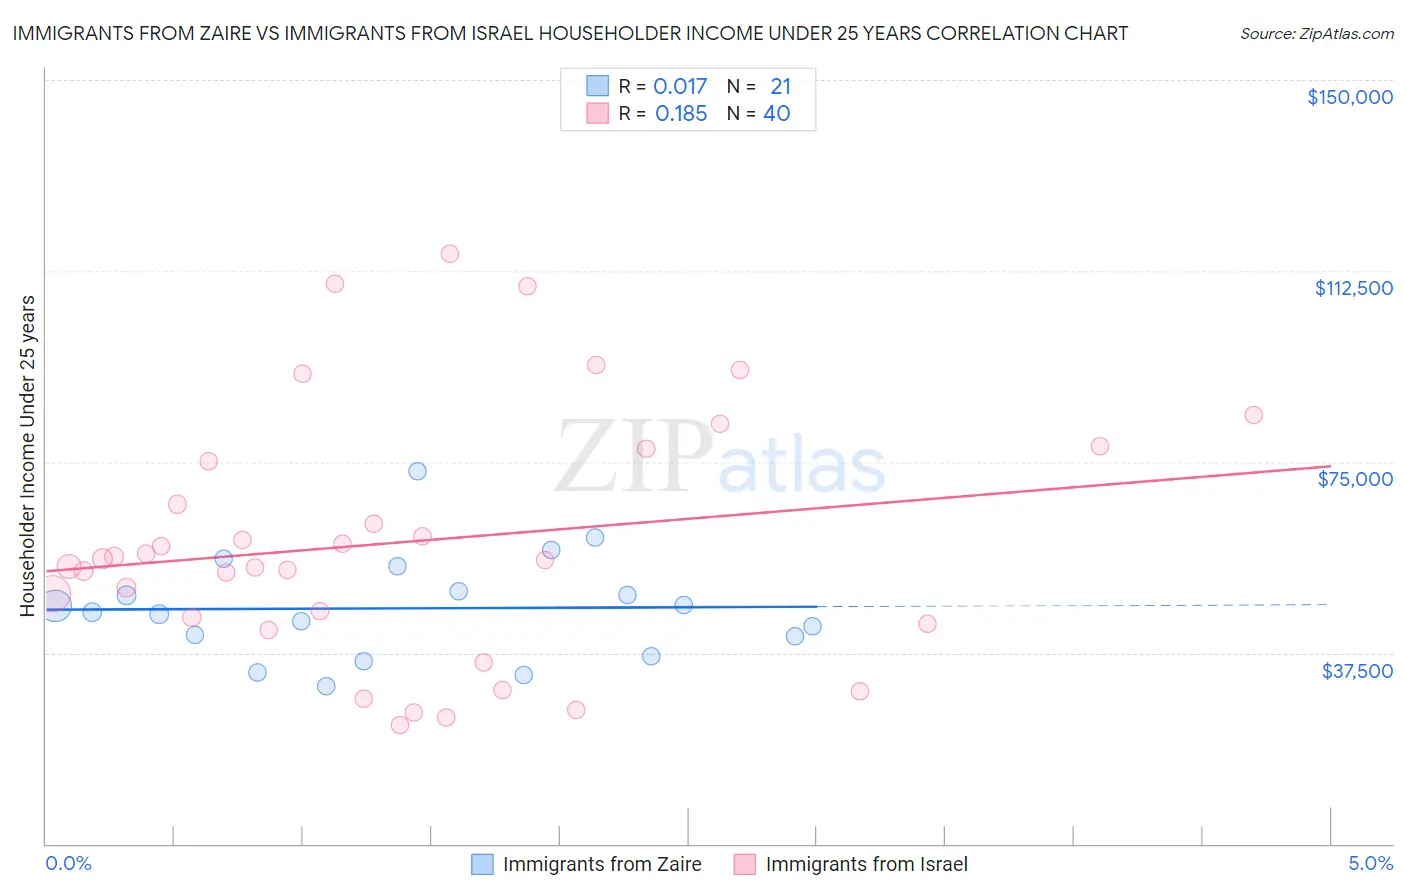 Immigrants from Zaire vs Immigrants from Israel Householder Income Under 25 years